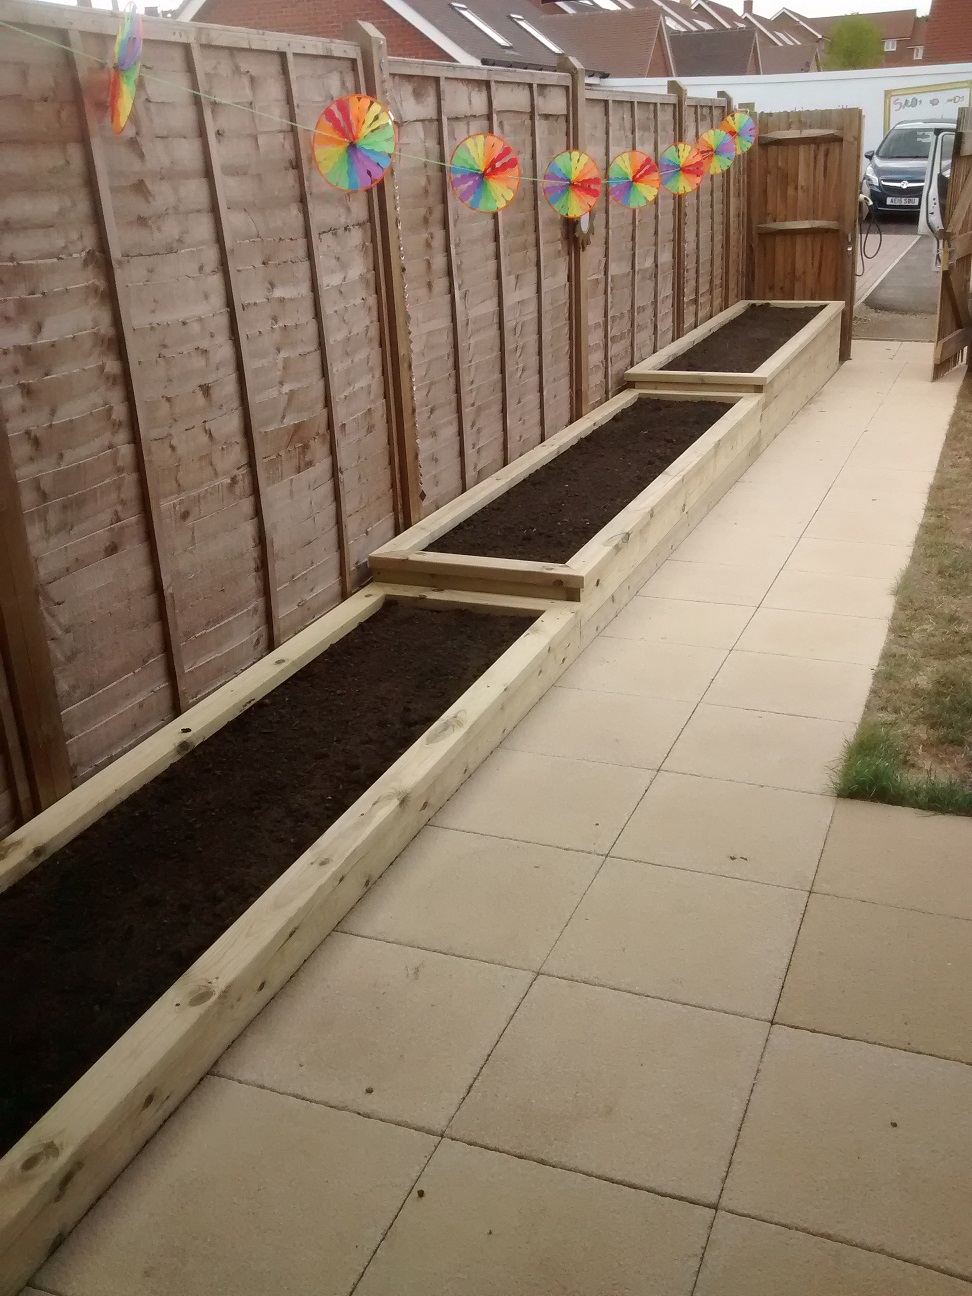 Three stepped raised beds after